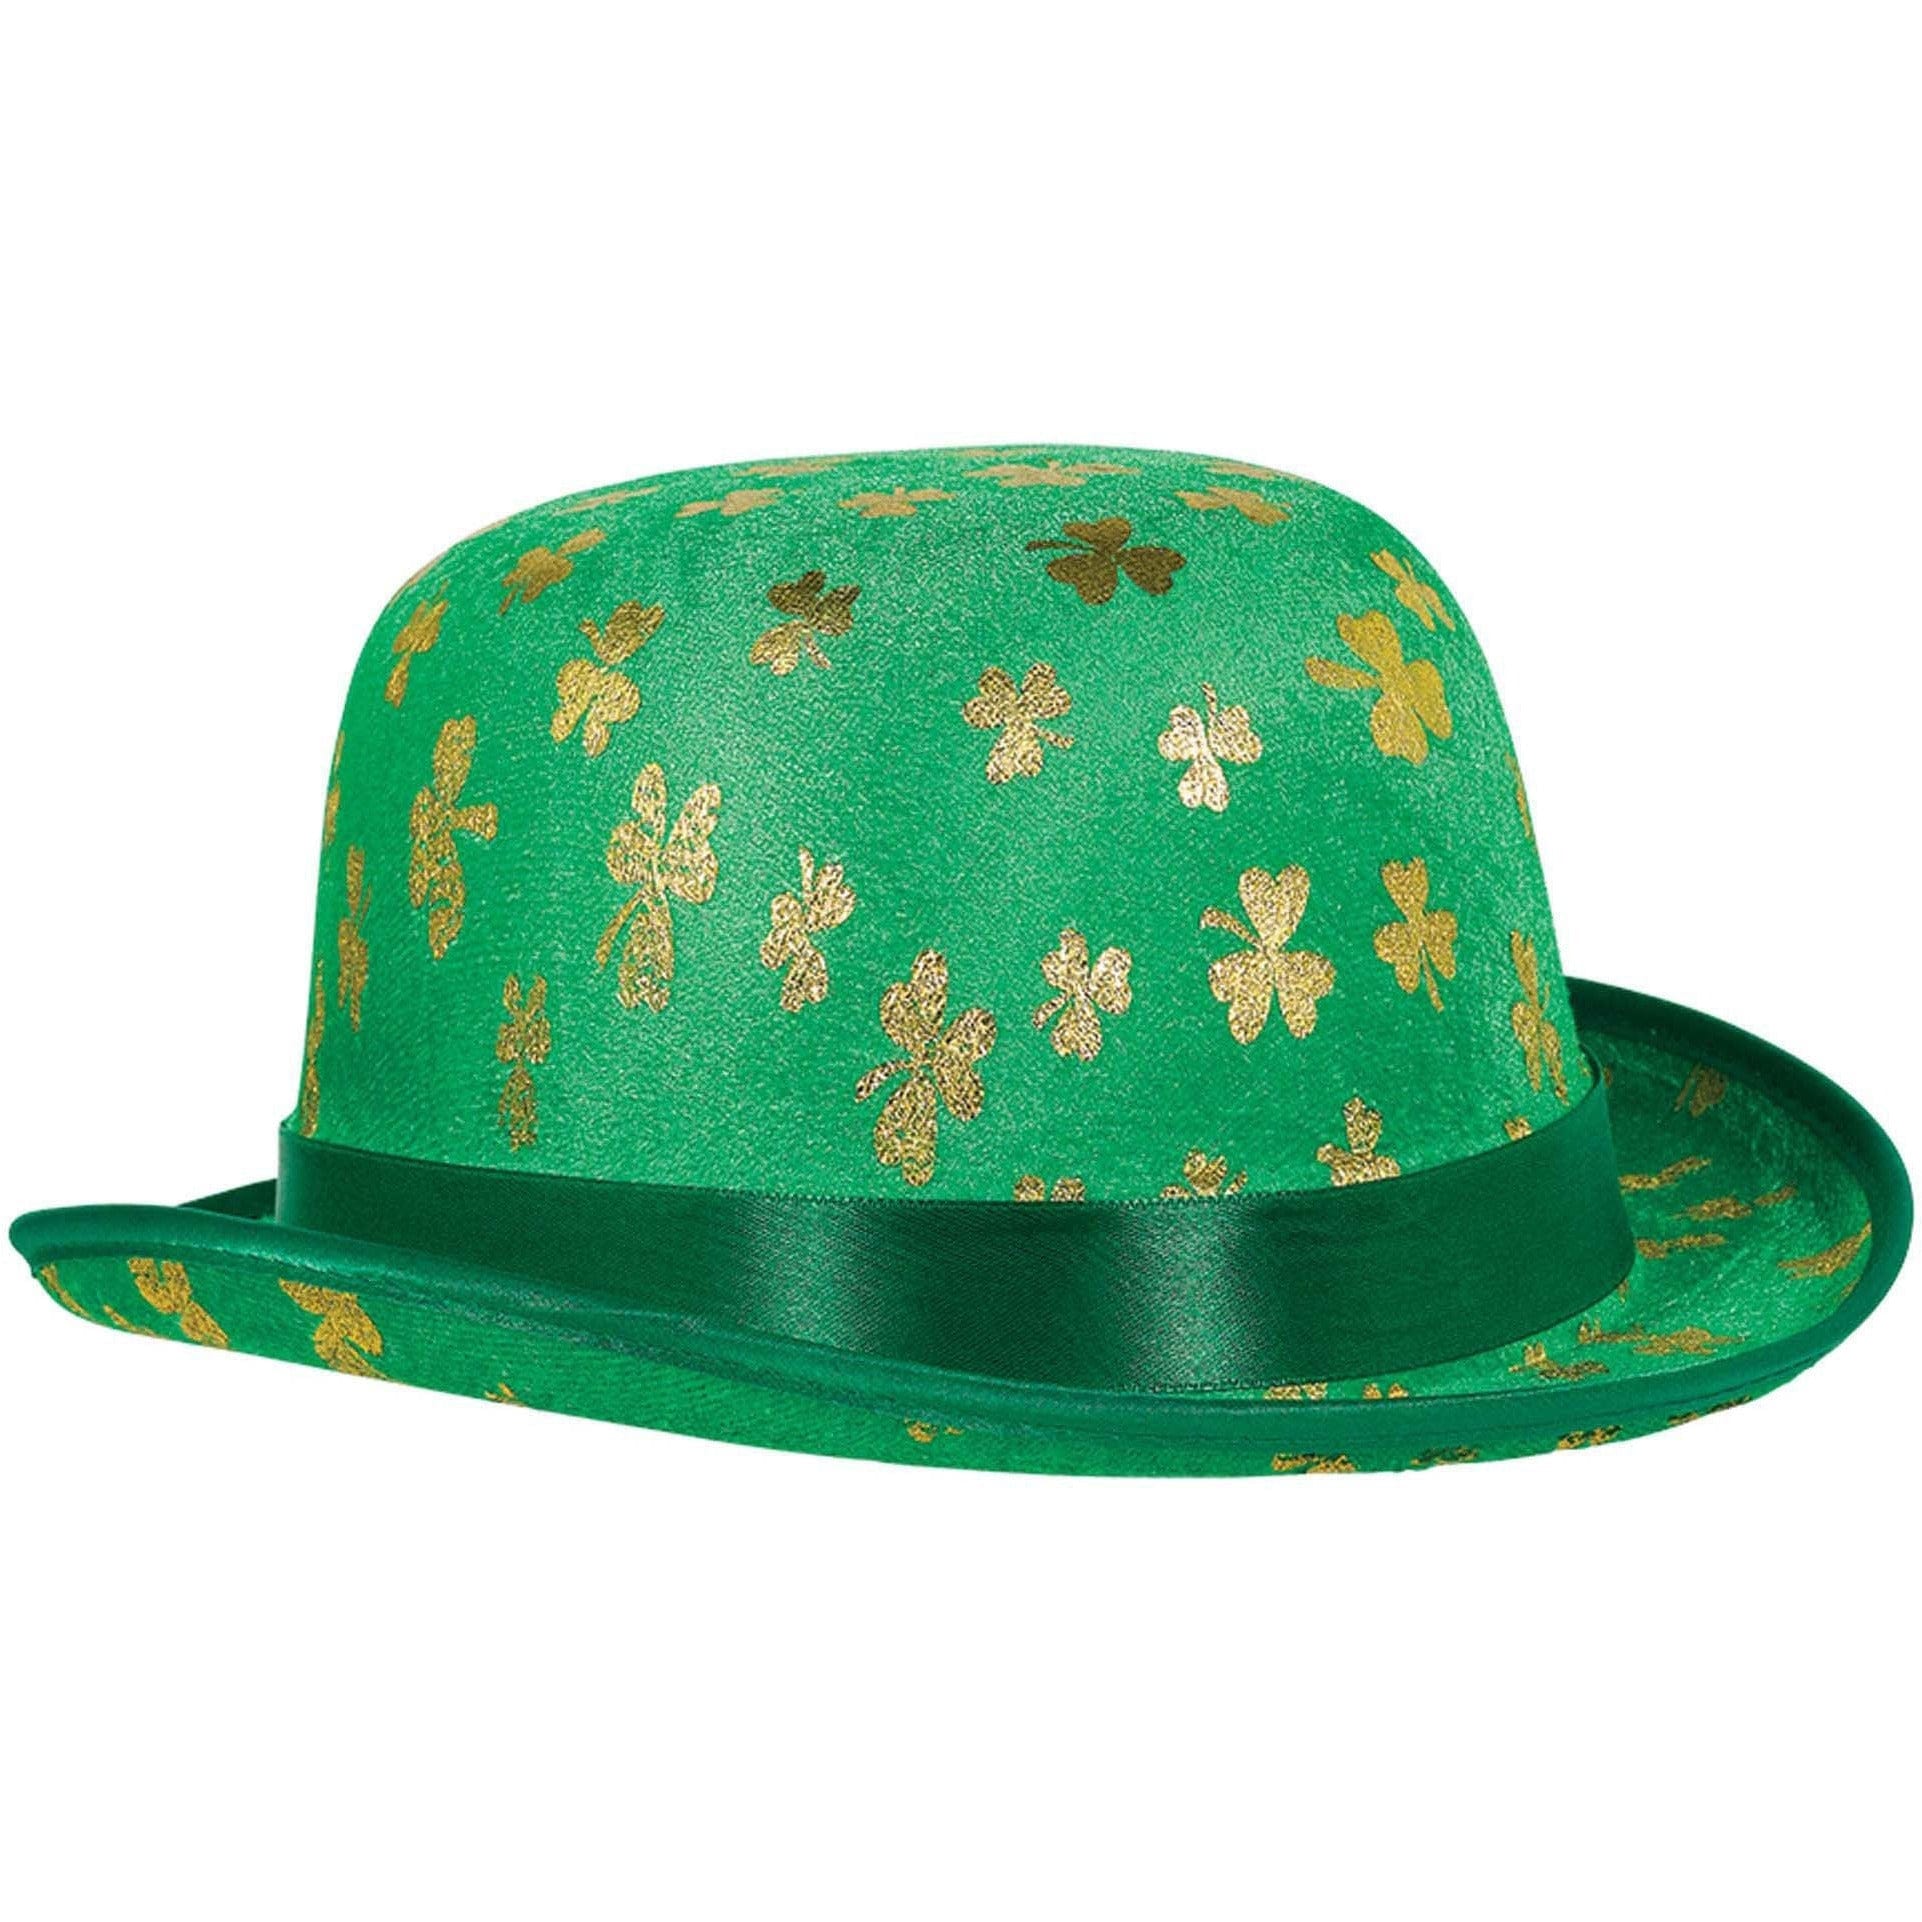 Amscan HOLIDAY: ST. PAT'S St. Patrick's Day Gold Shamrock Derby Hat